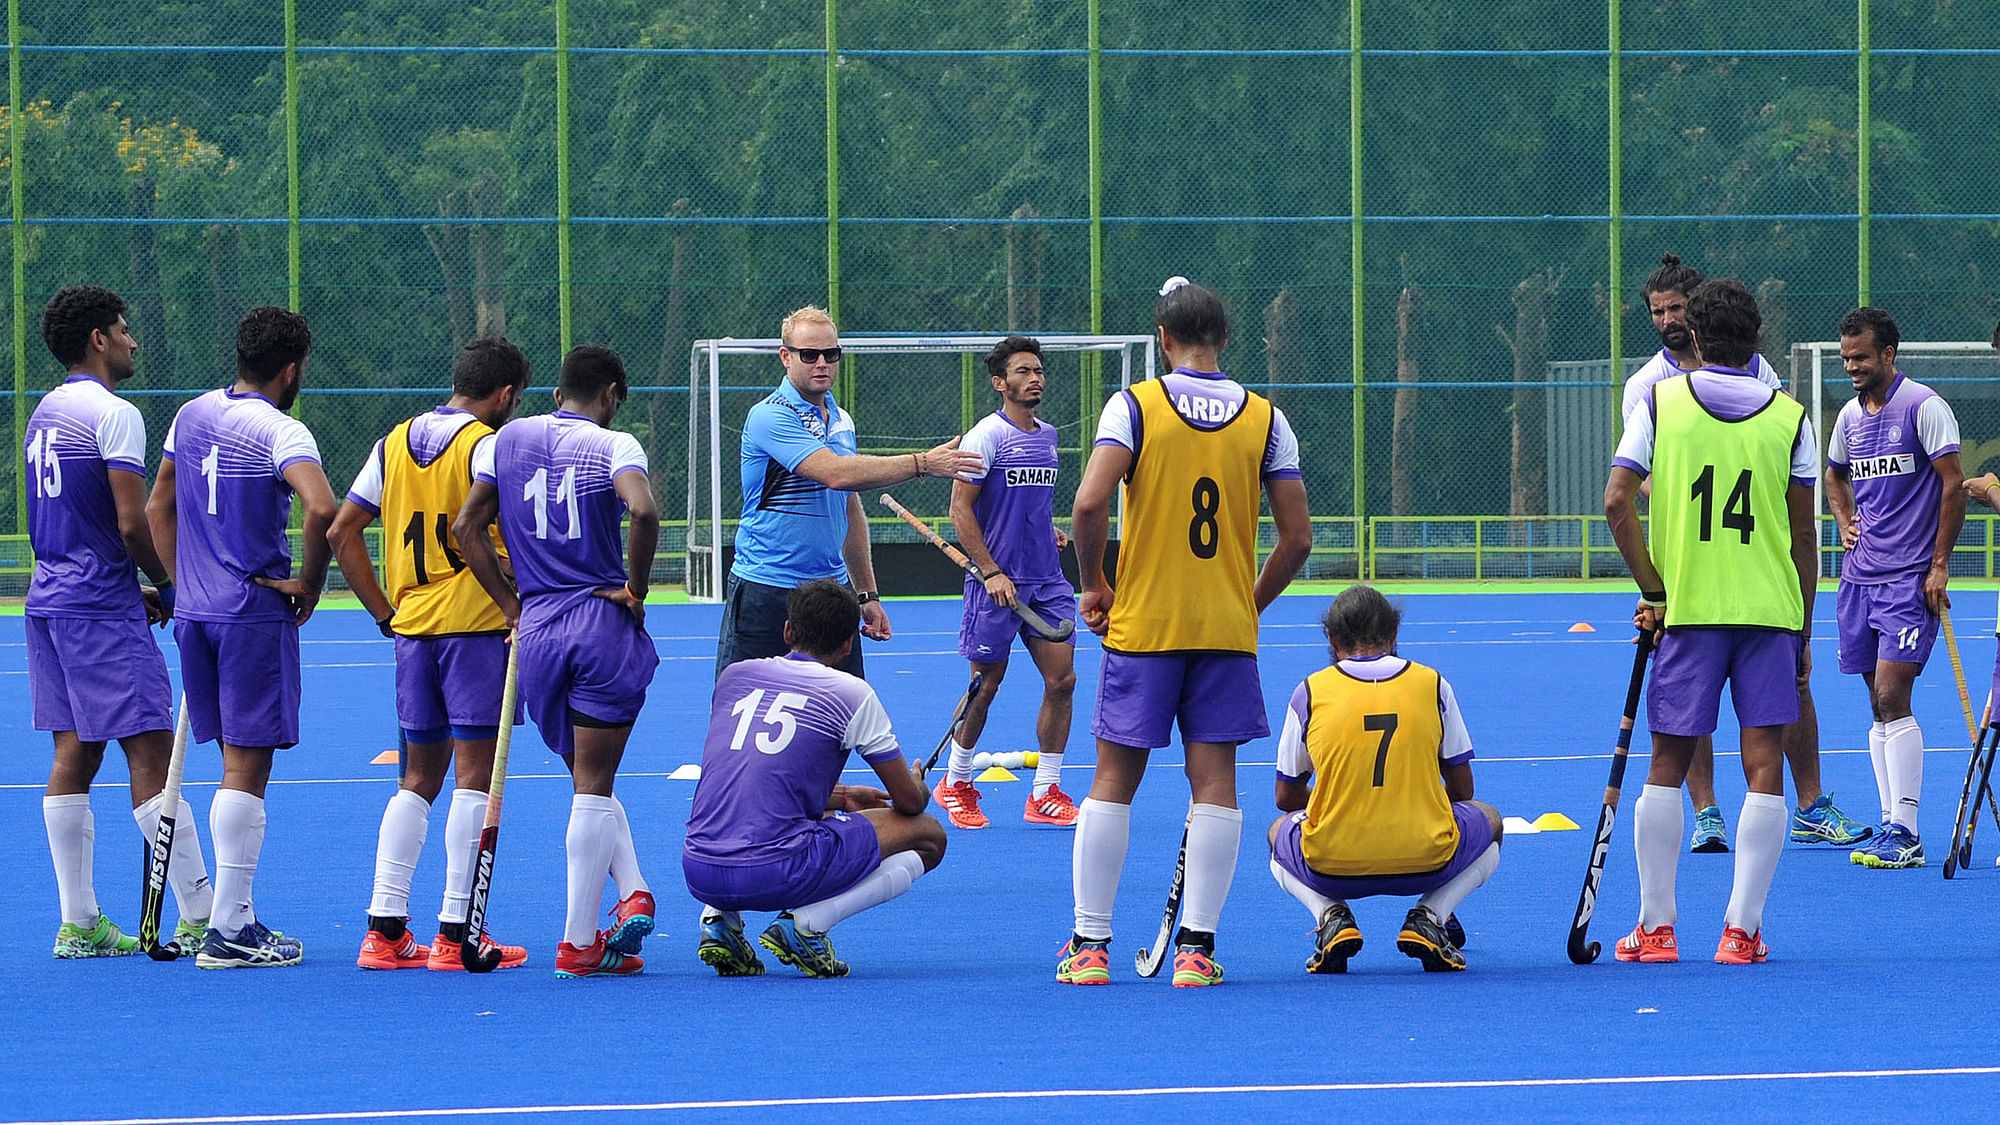 Sjoerd Marijne was the coach of the Indian men’s hockey team at the 2018 Commonwealth Games.